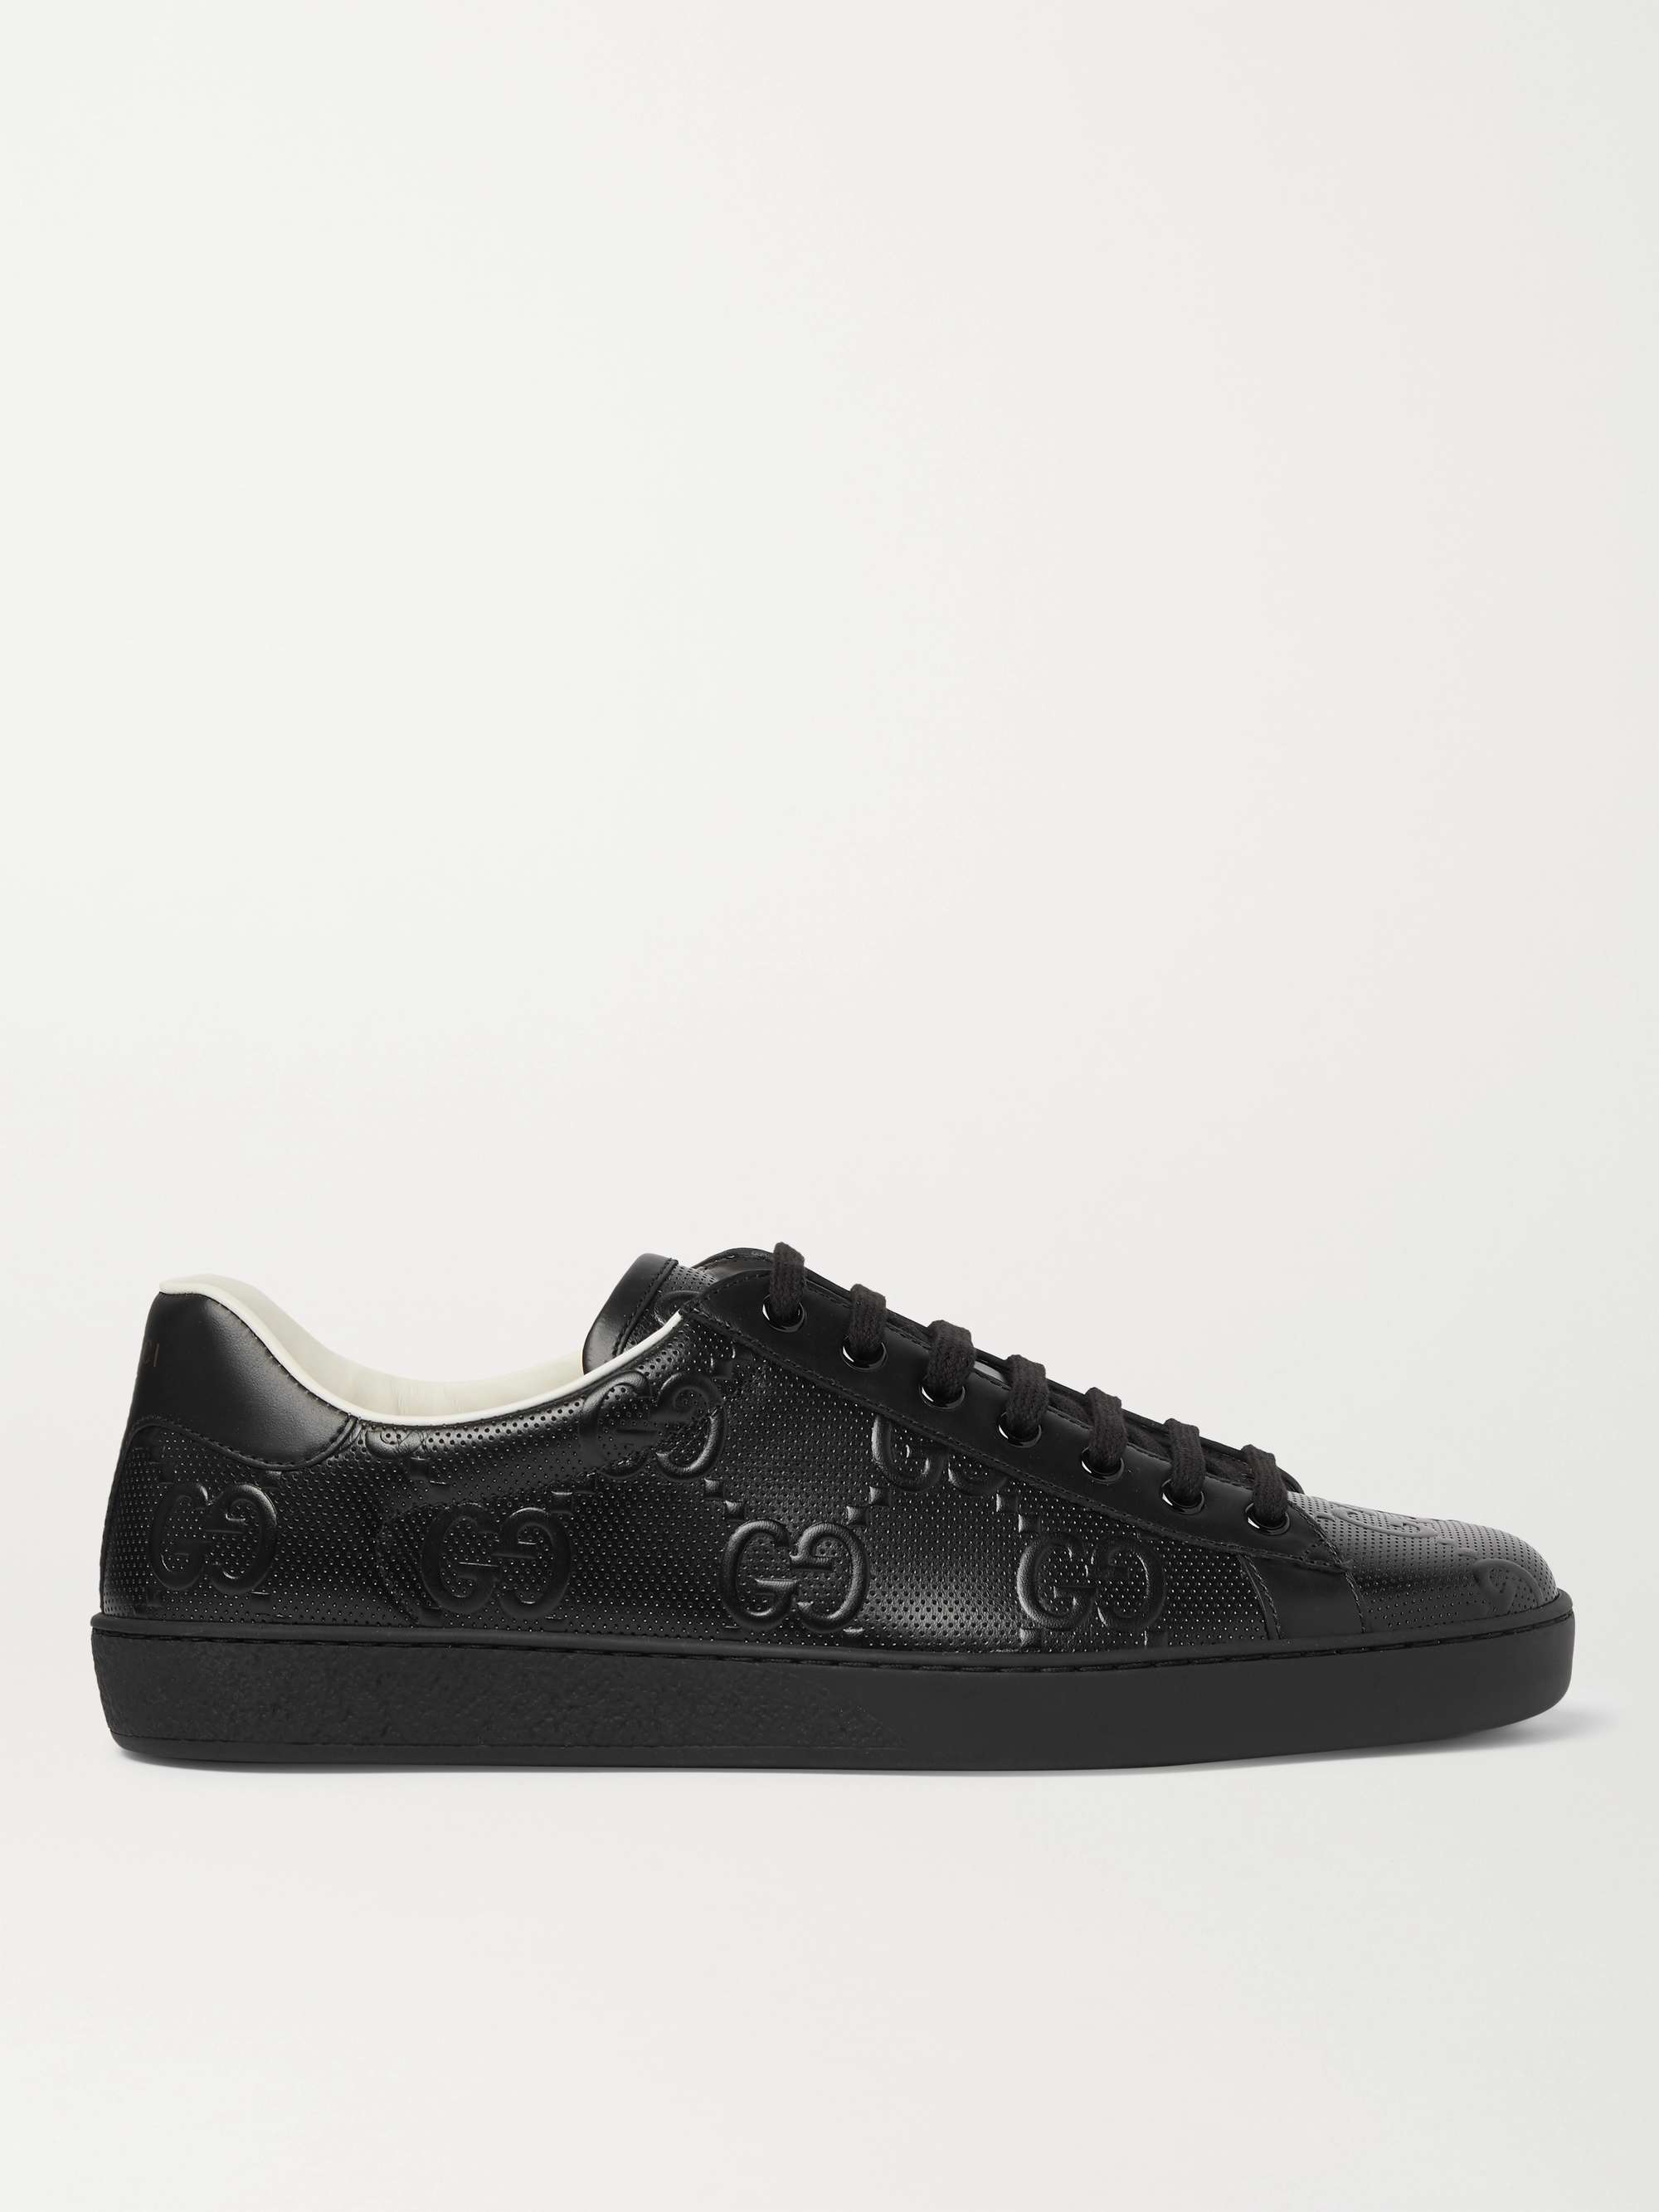 GUCCI Ace Logo-Embossed Perforated Leather Sneakers for Men | MR PORTER